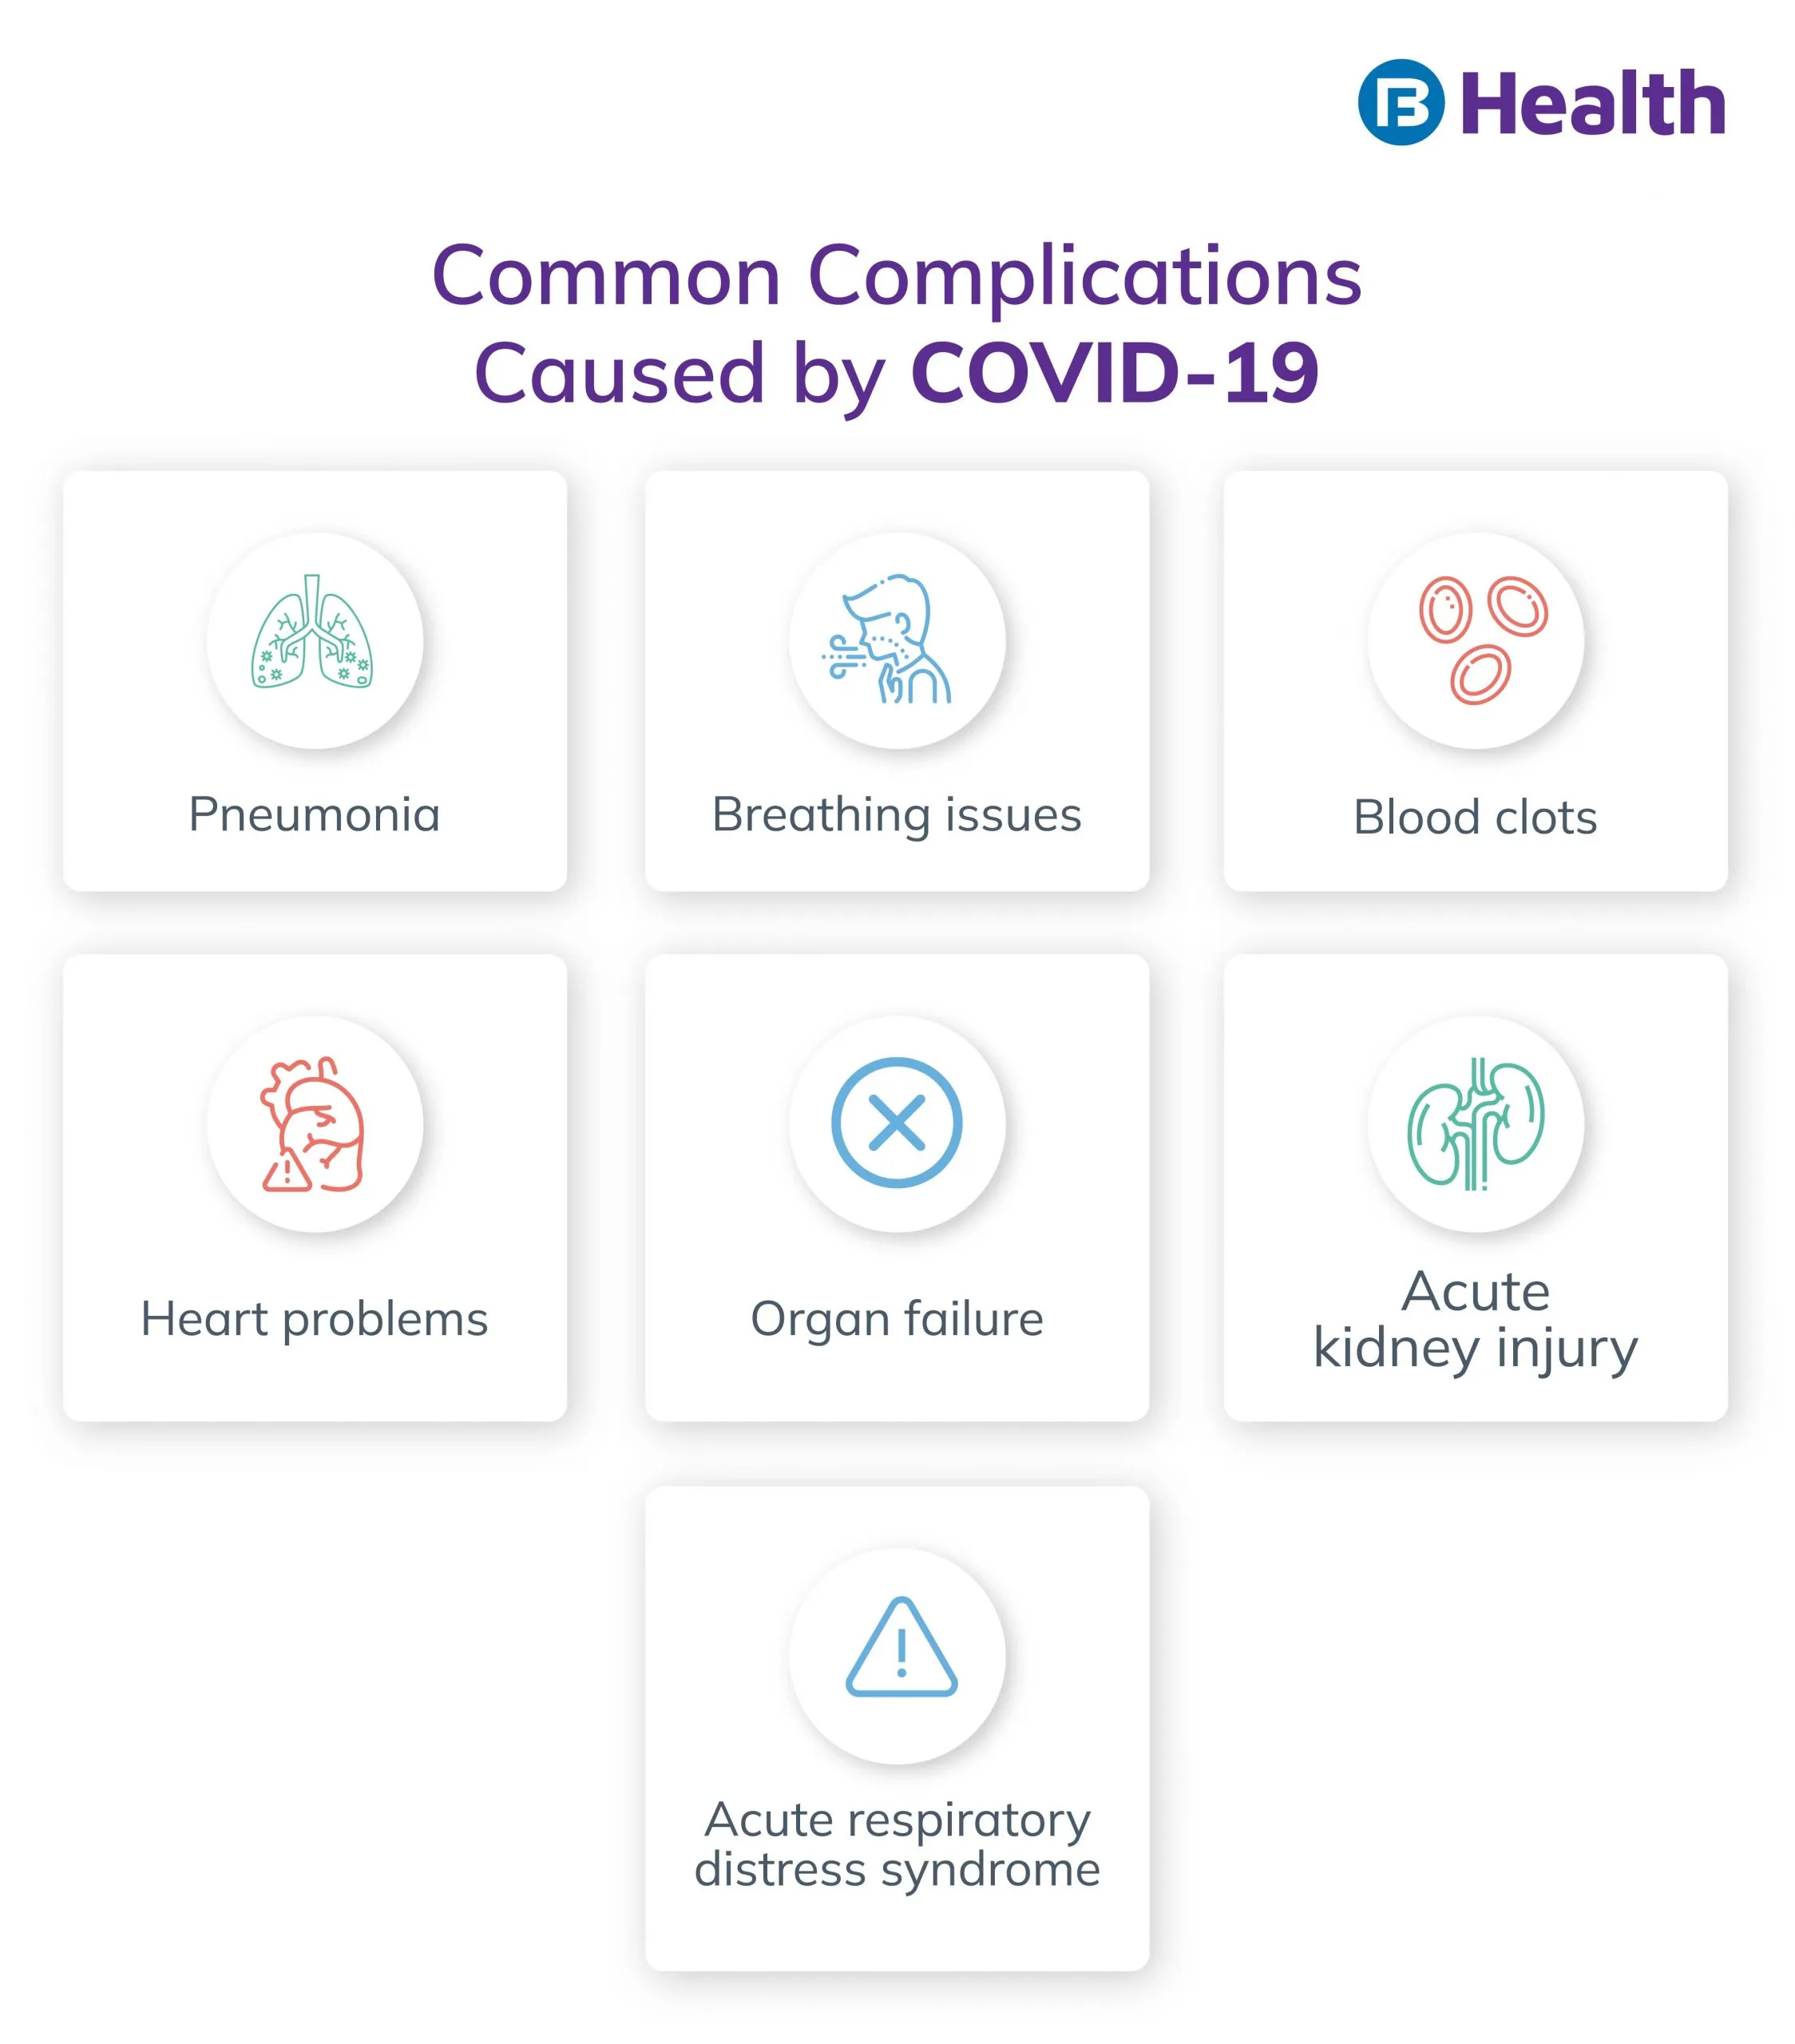 Complications caused by COVID-19